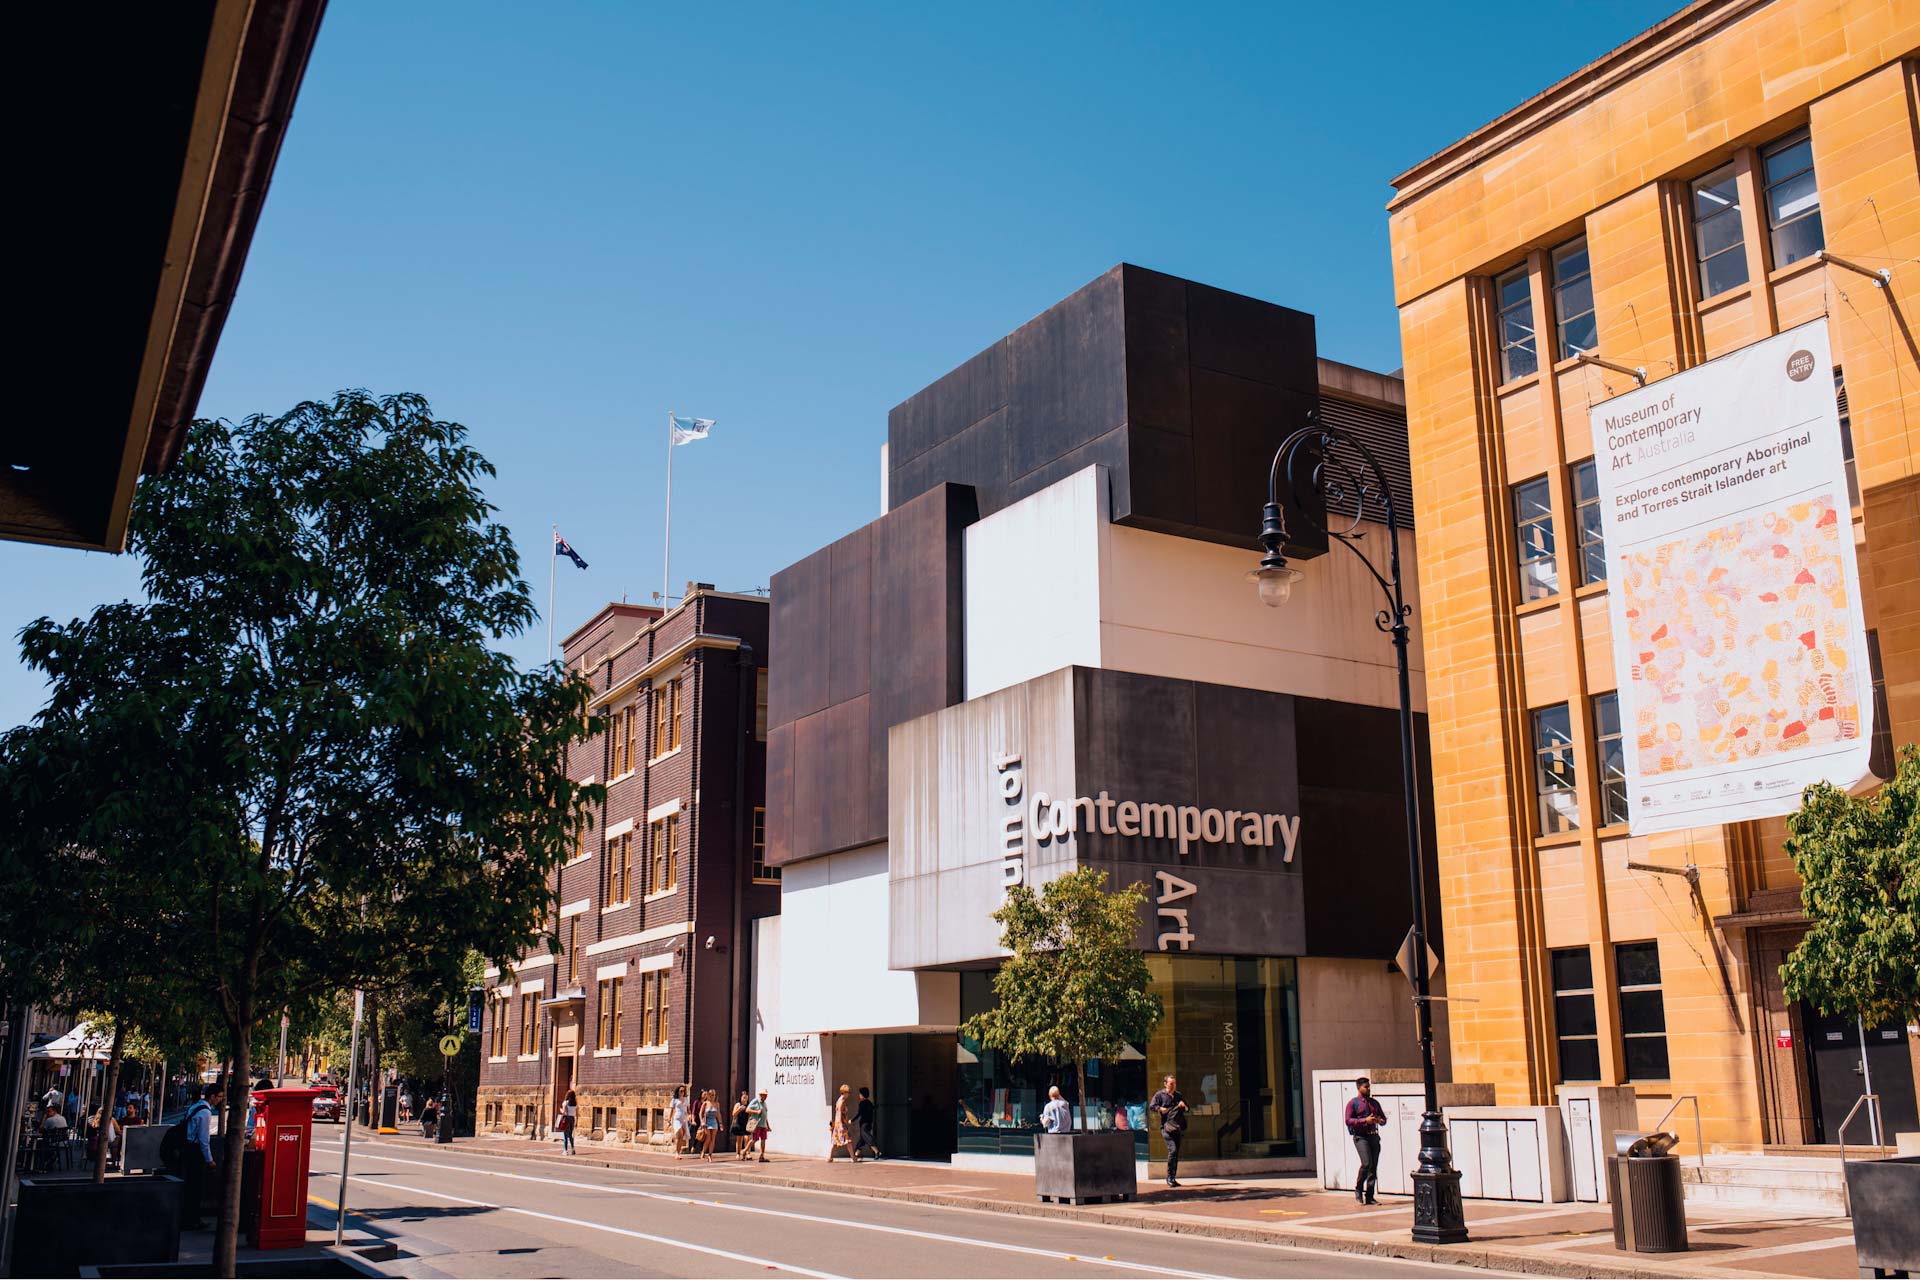 Street view of the Museum of Contemporary Art